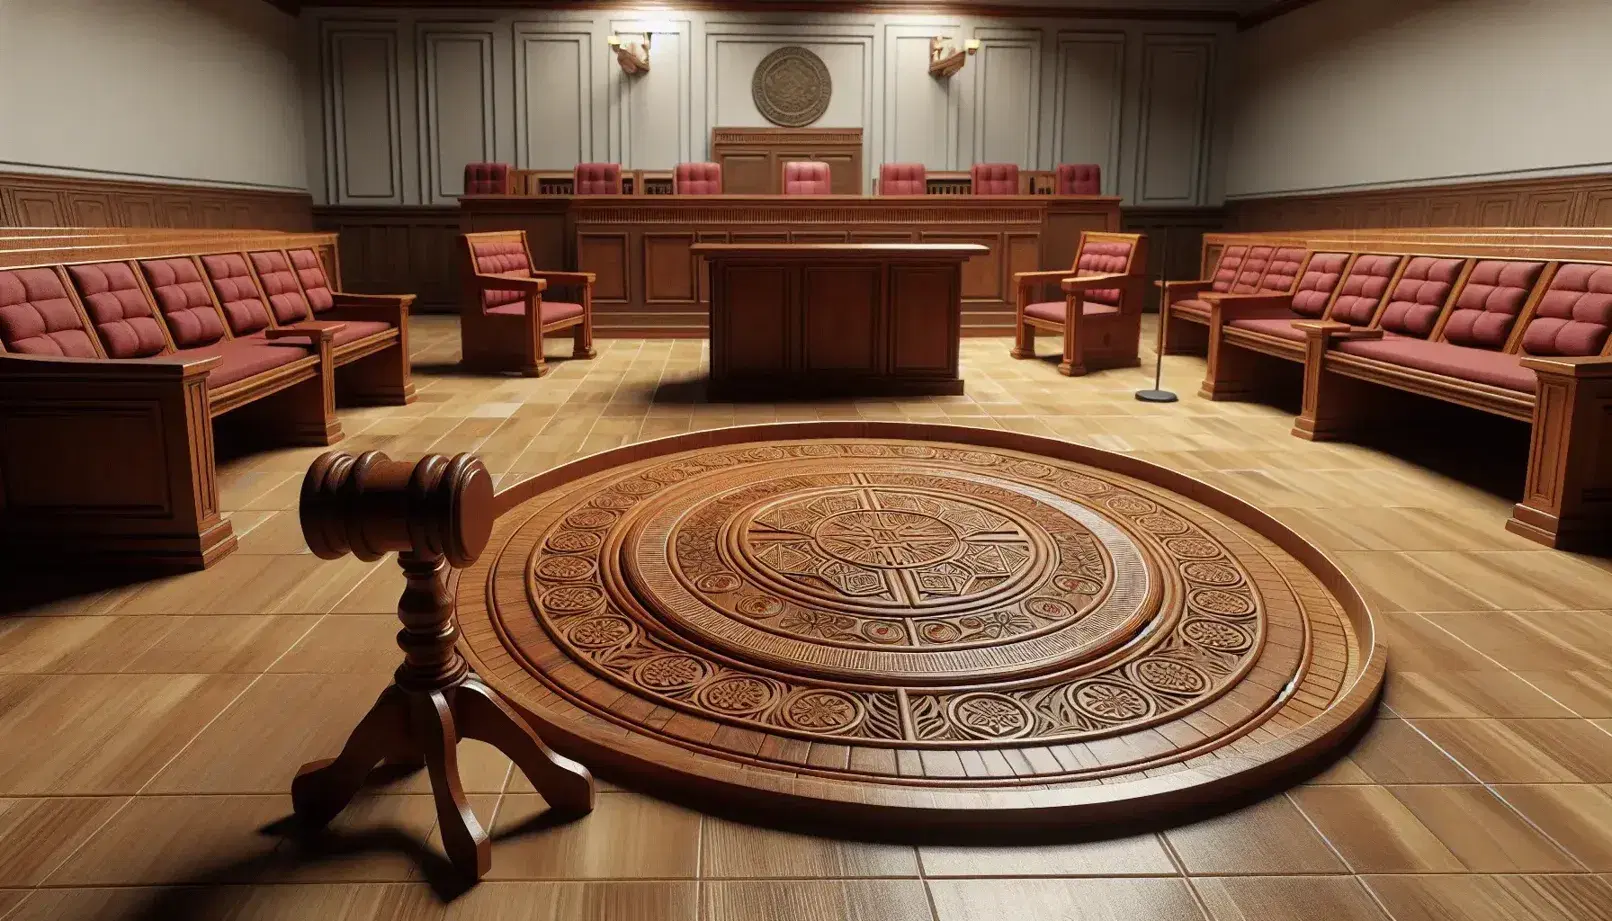 Empty courtroom interior with judge's bench, witness stand, jury seats with red cushions, ornate floor seal, and gallery benches in soft lighting.